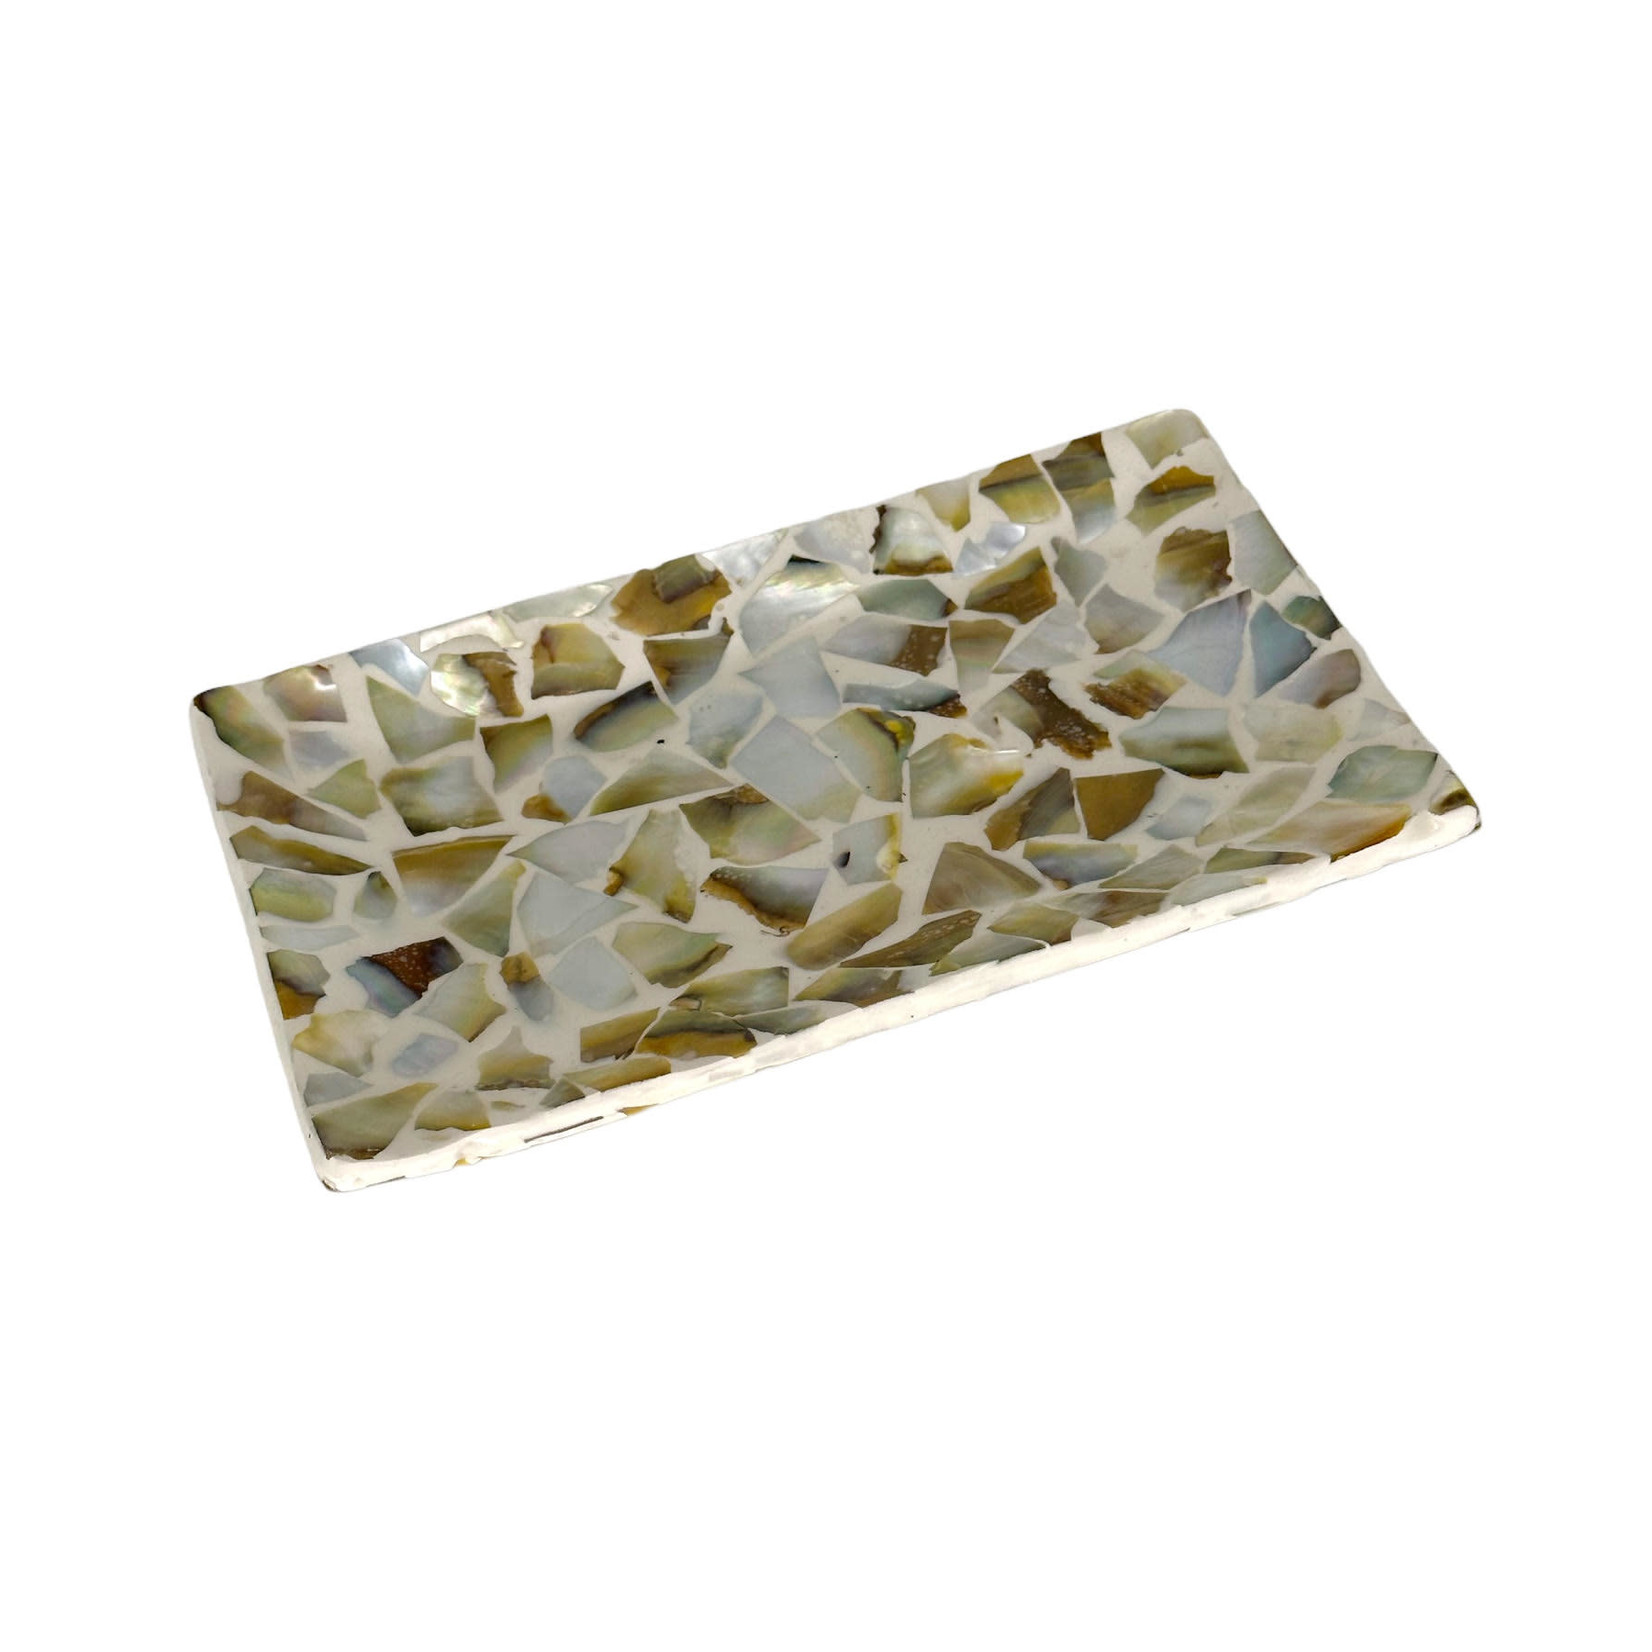 Handmade Mother of Pearl Mosaic Chip Tray 12cm x 20cm